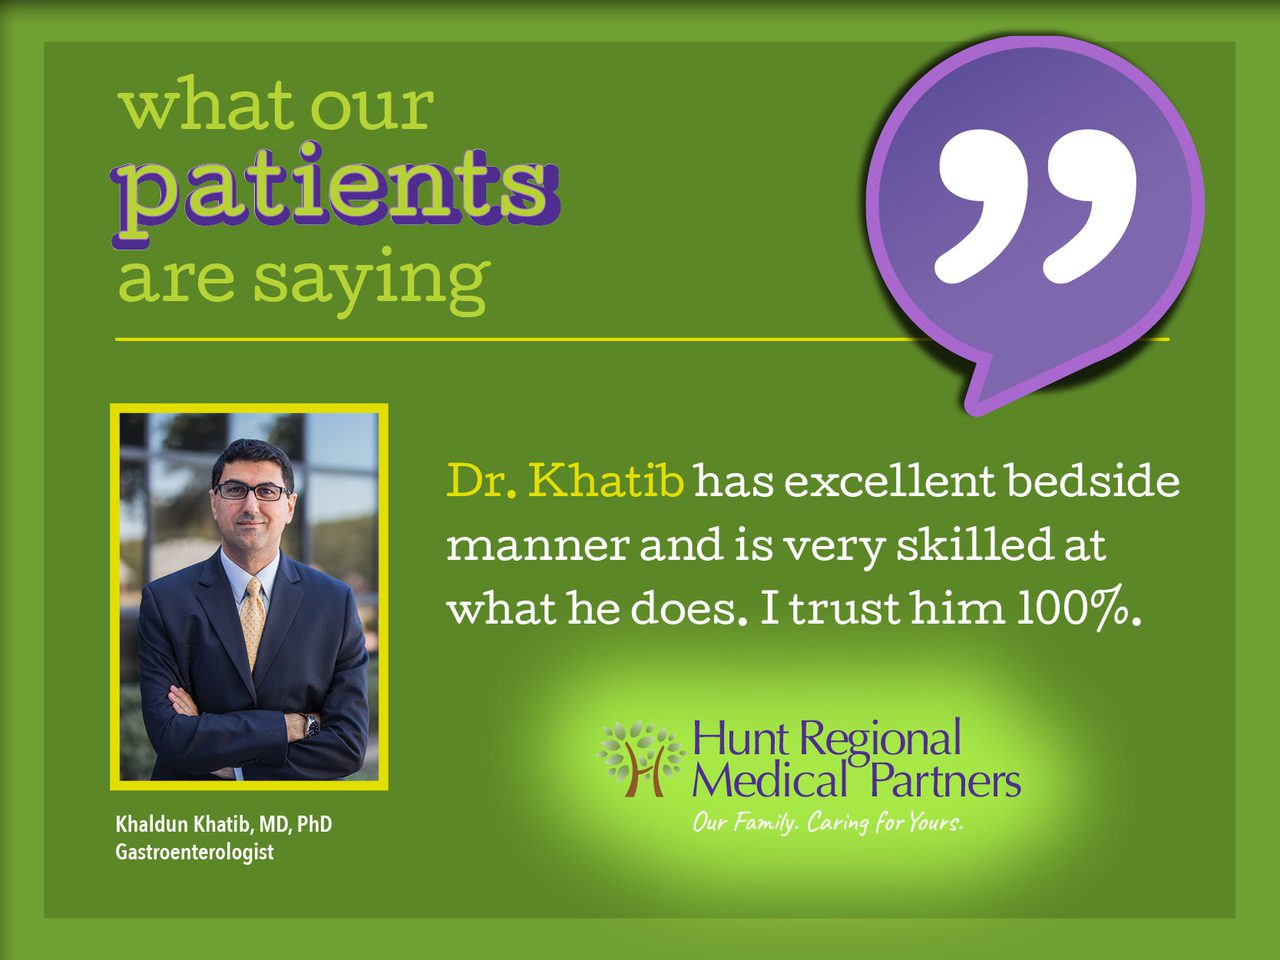 what our patients are saying | Dr. Khatib has excellent bedside manner and is very skilled at what he does. I trust him 100%. | Khaldun Khatib, MD, PhD | Gastroenterologist | Hunt Regional Medical Partners | Our Family. Caring for Yours.